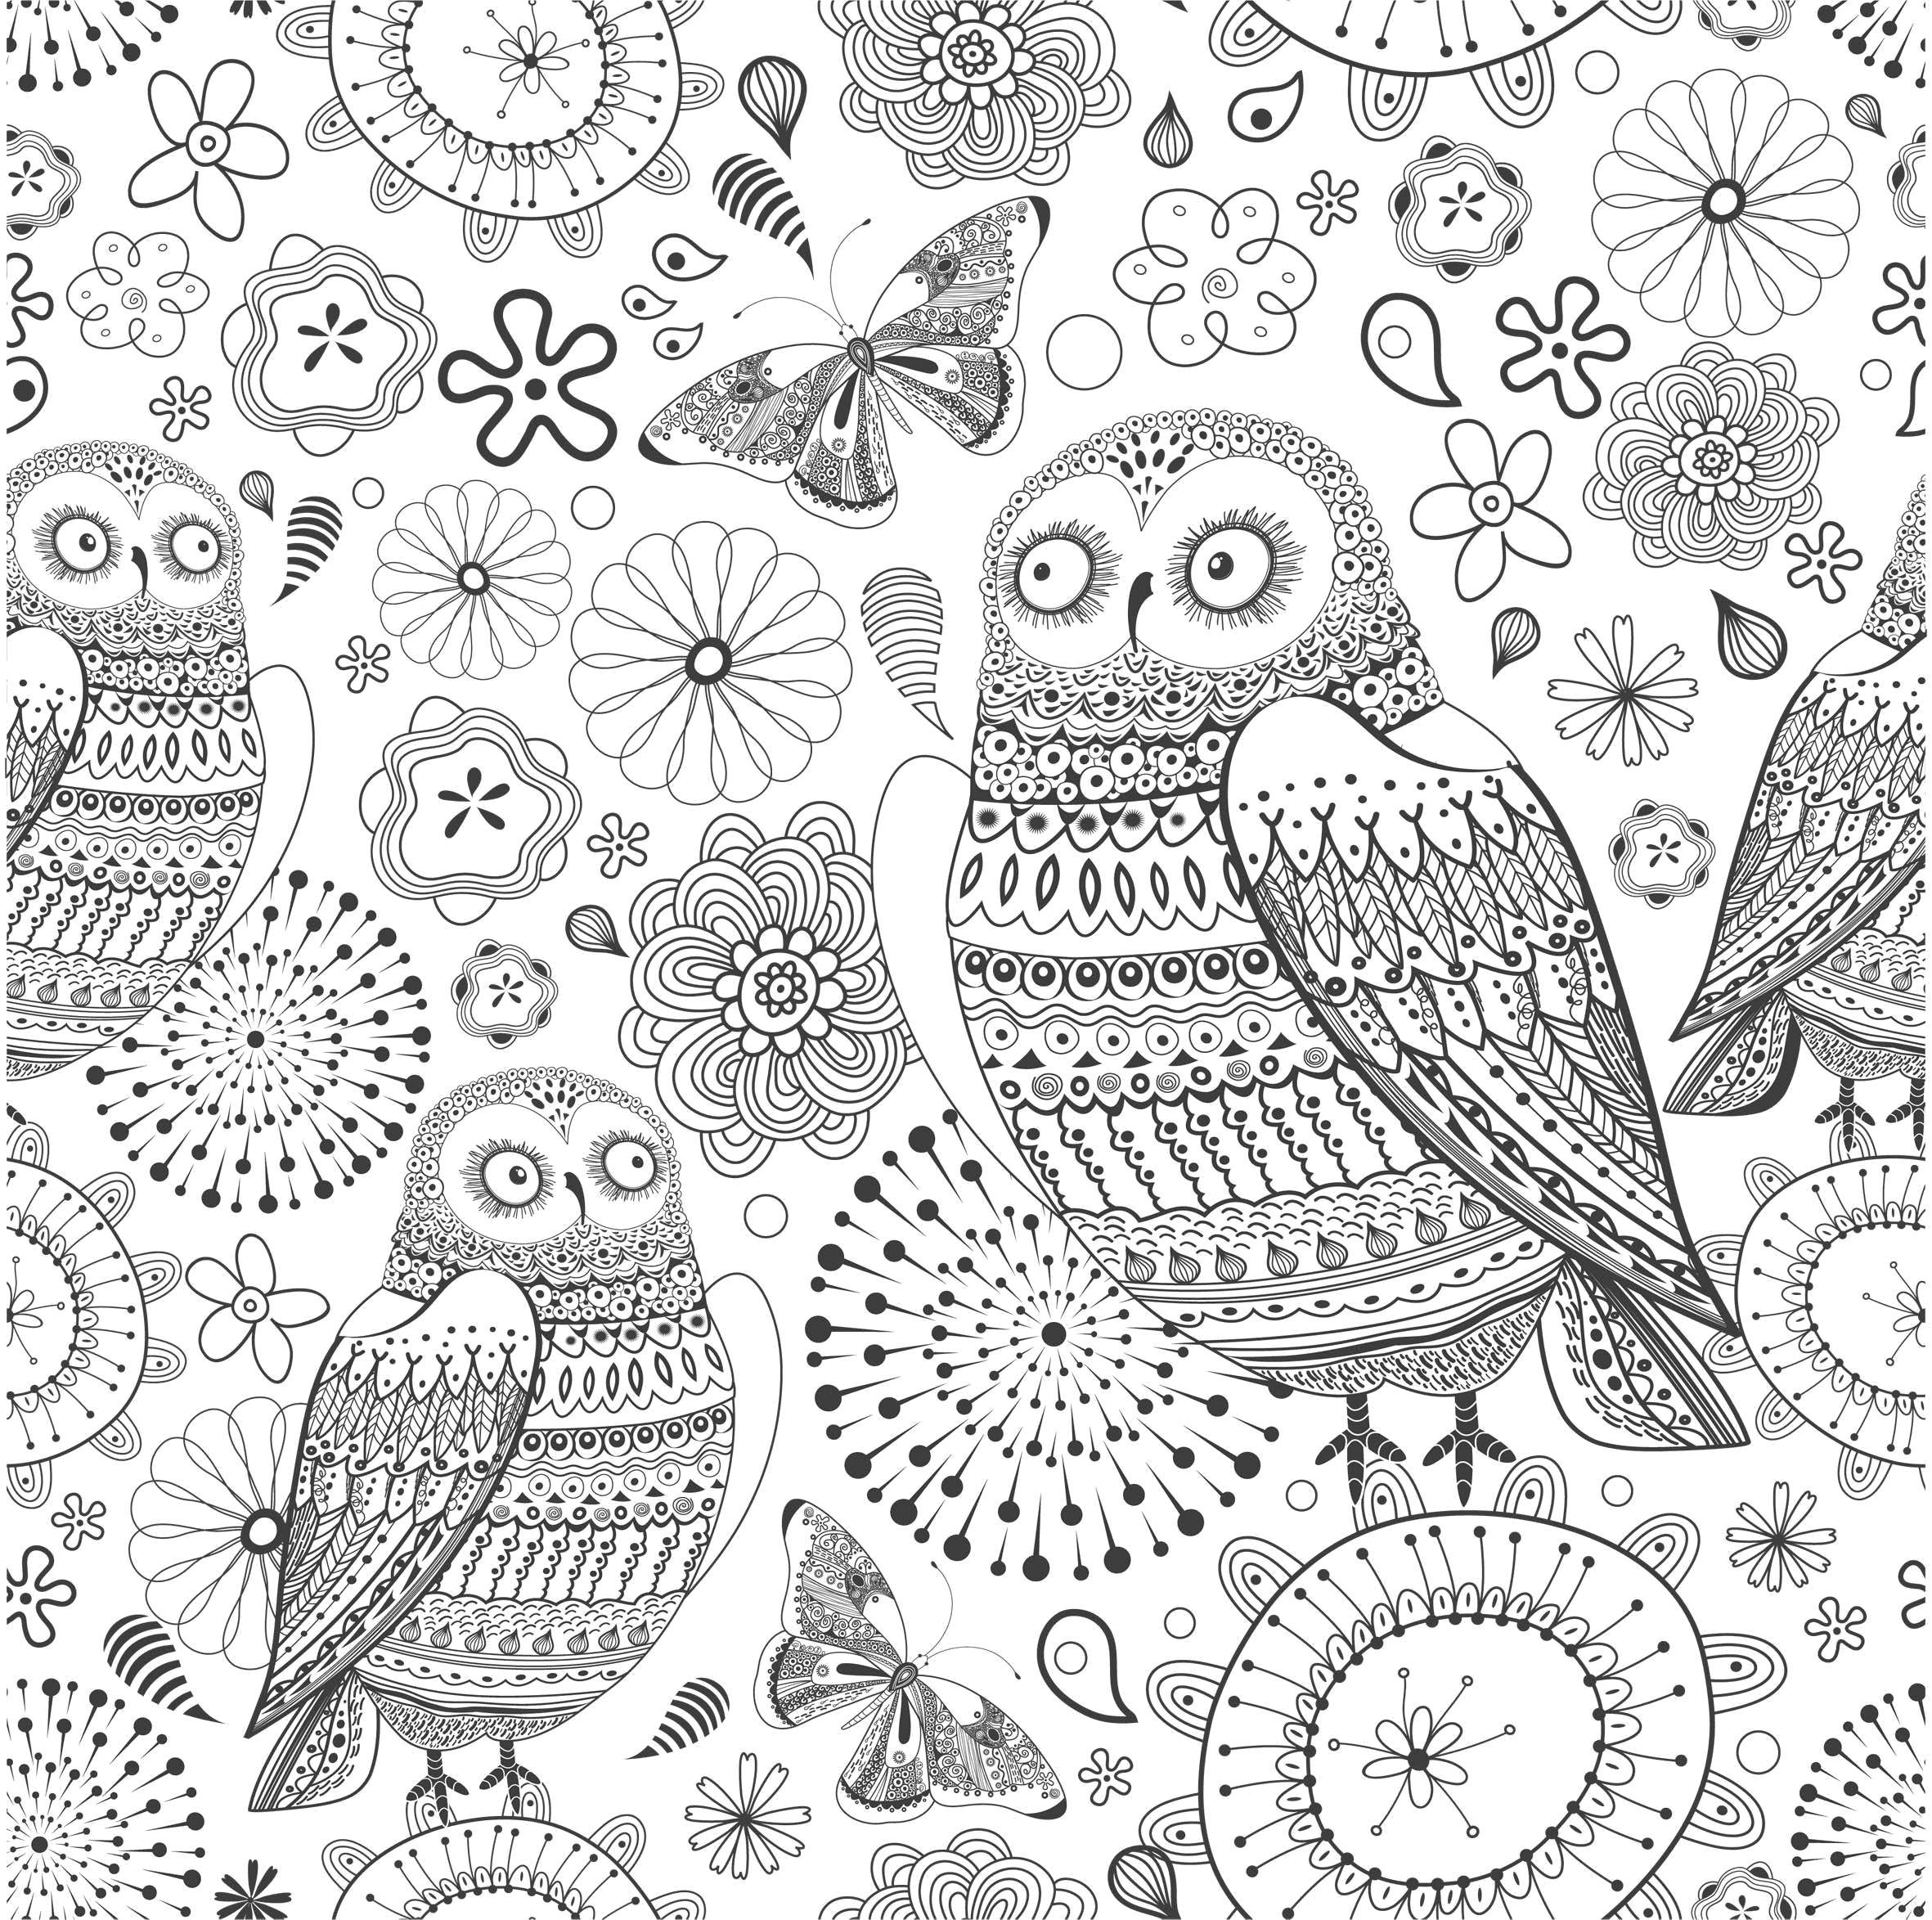 Coloring Coloring antistress owl. Category coloring antistress. Tags:  coloring, anti-stress, owl.